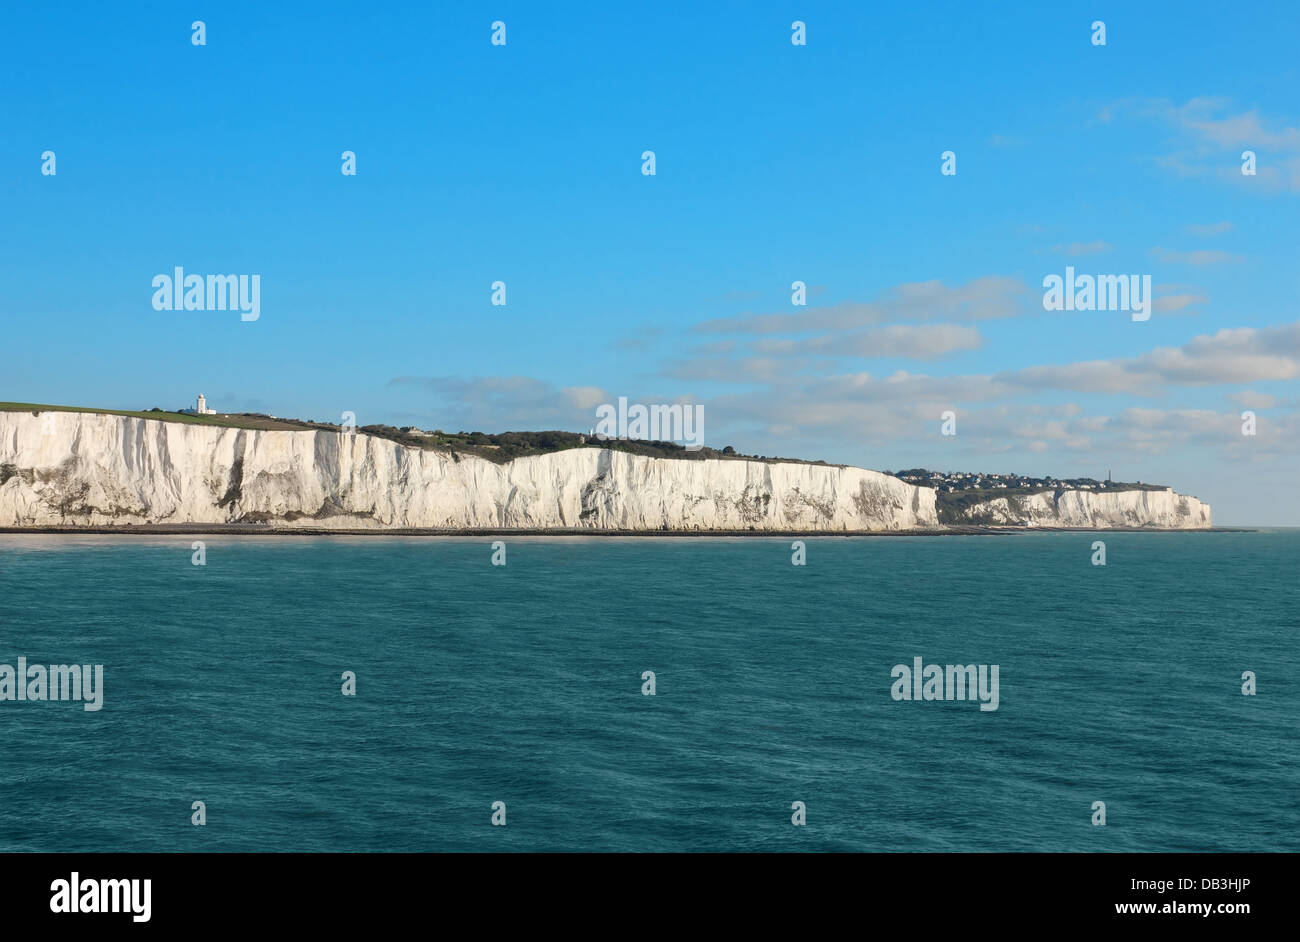 Sea view of the famous white cliffs near Dover in UK from a ferry leaving Great Britain toward France. Stock Photo